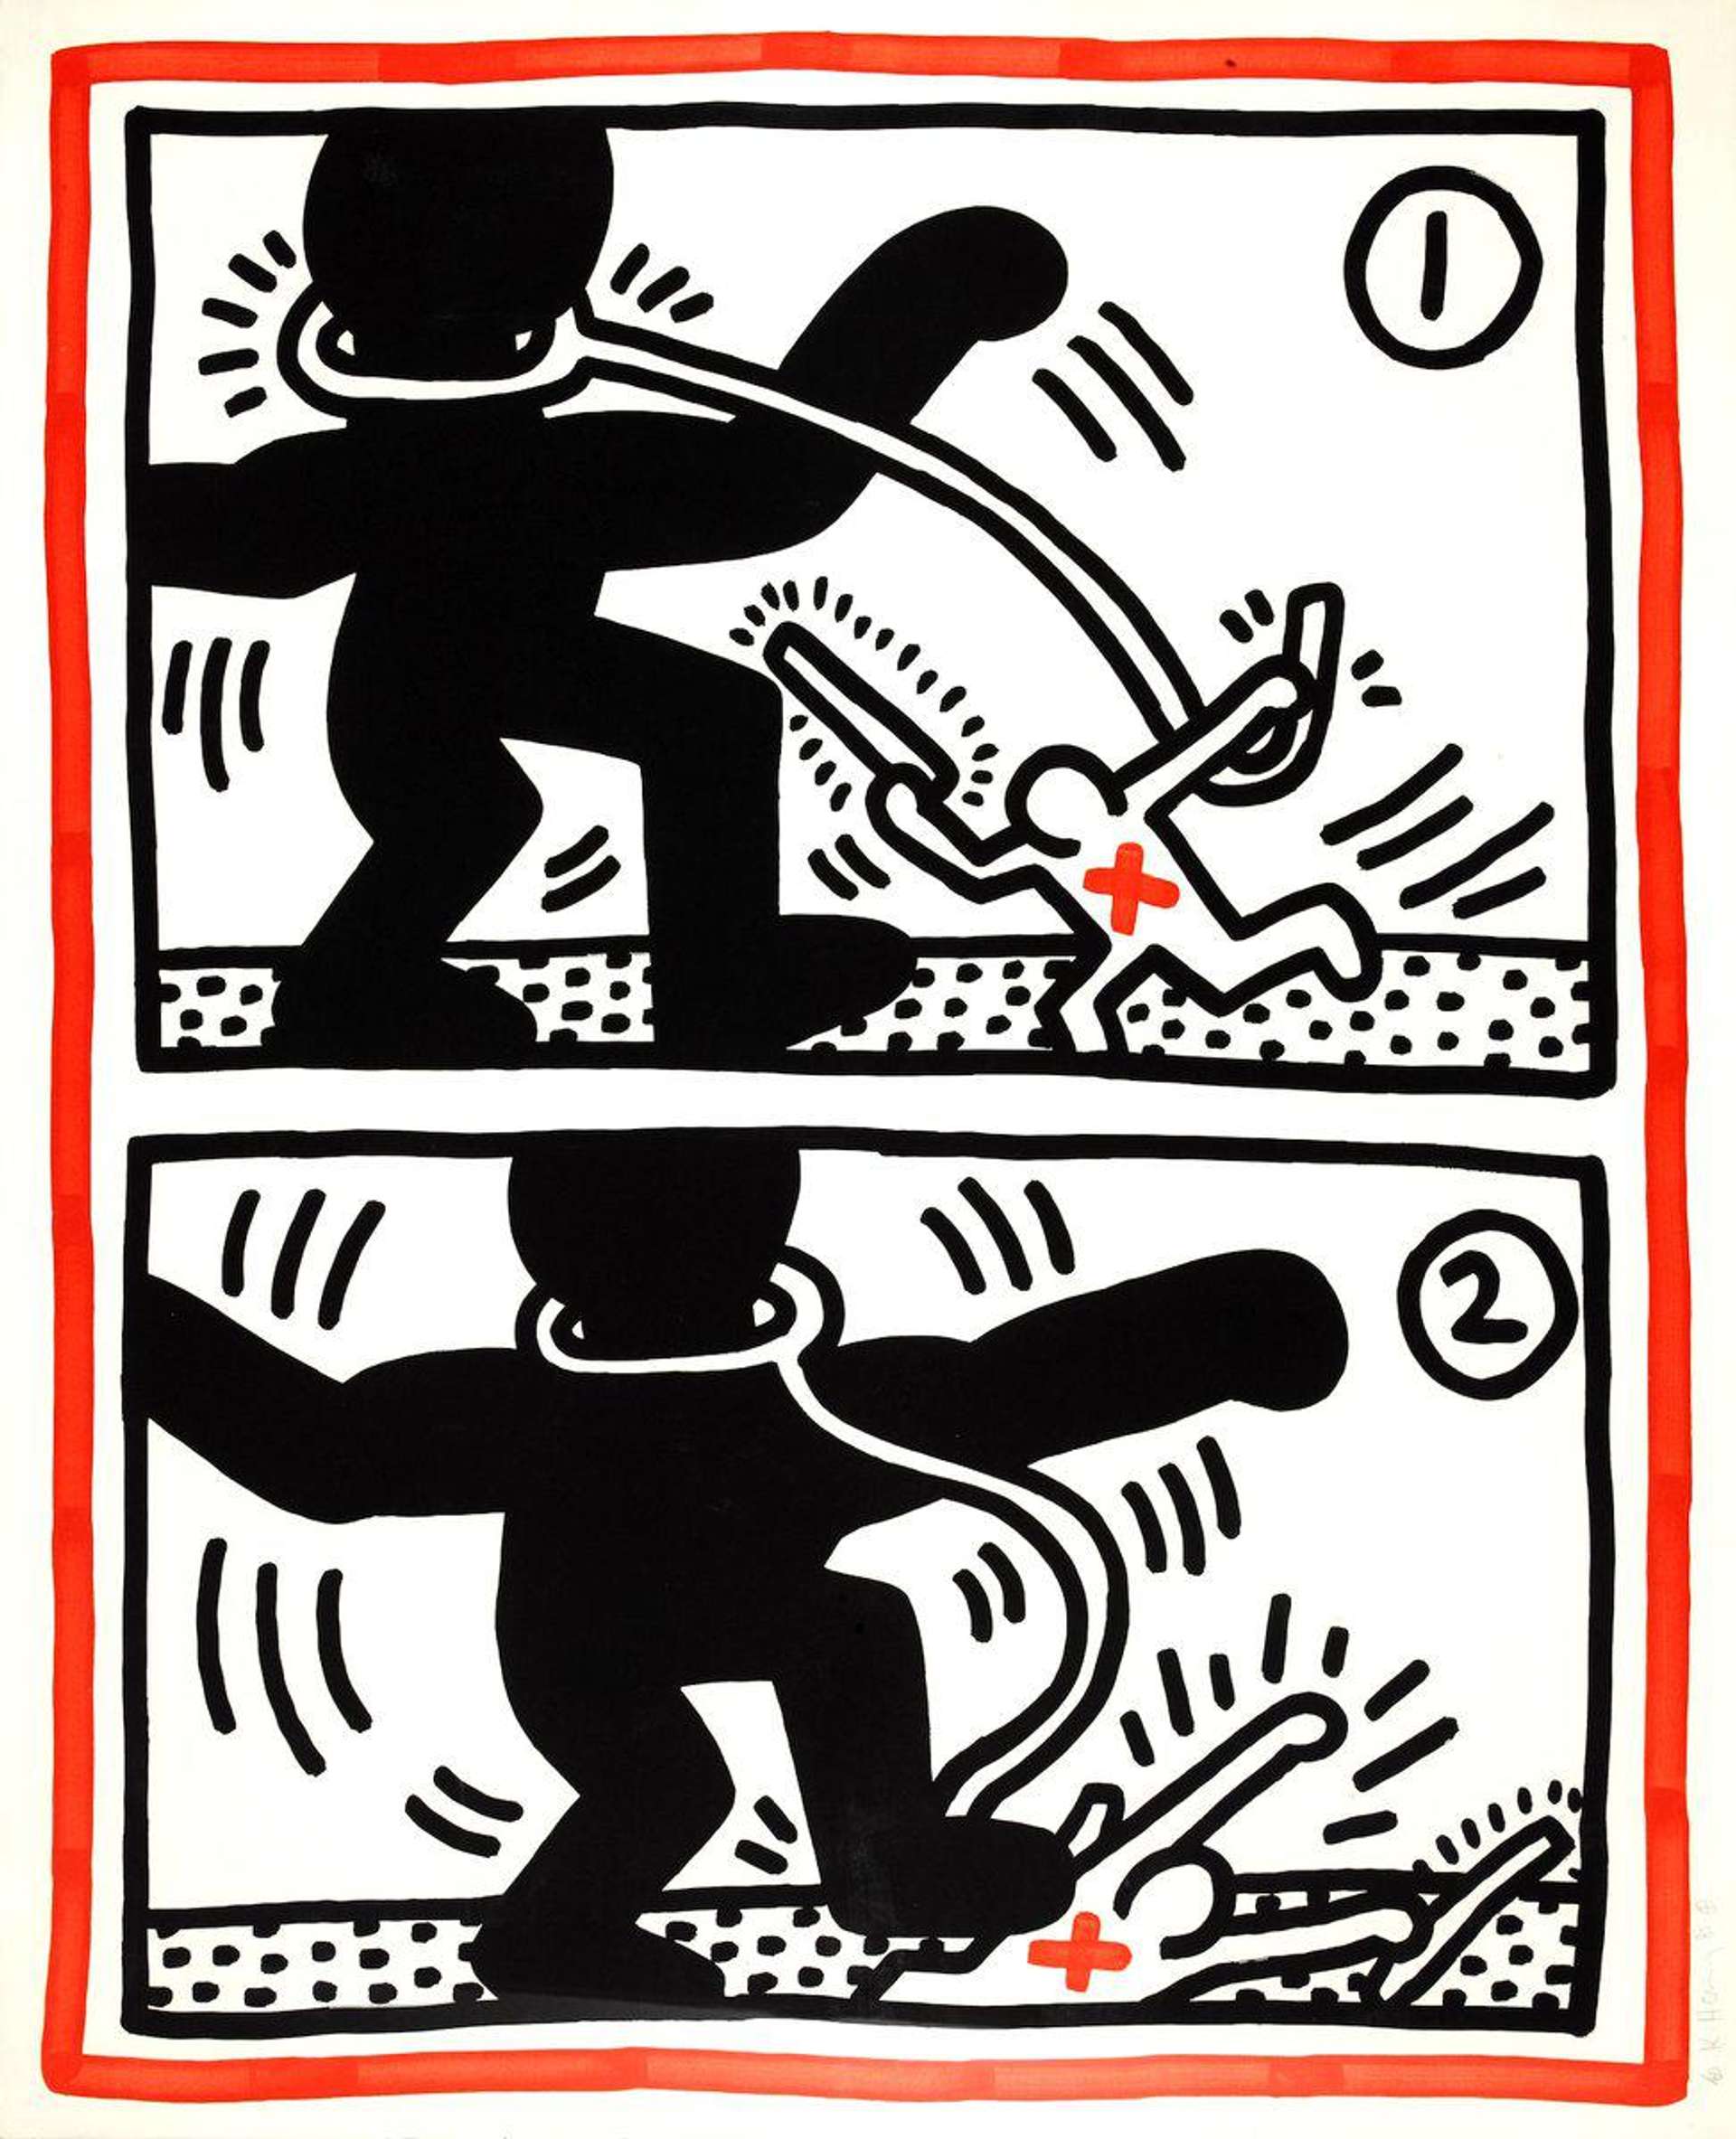 Free South Africa 2 by Keith Haring